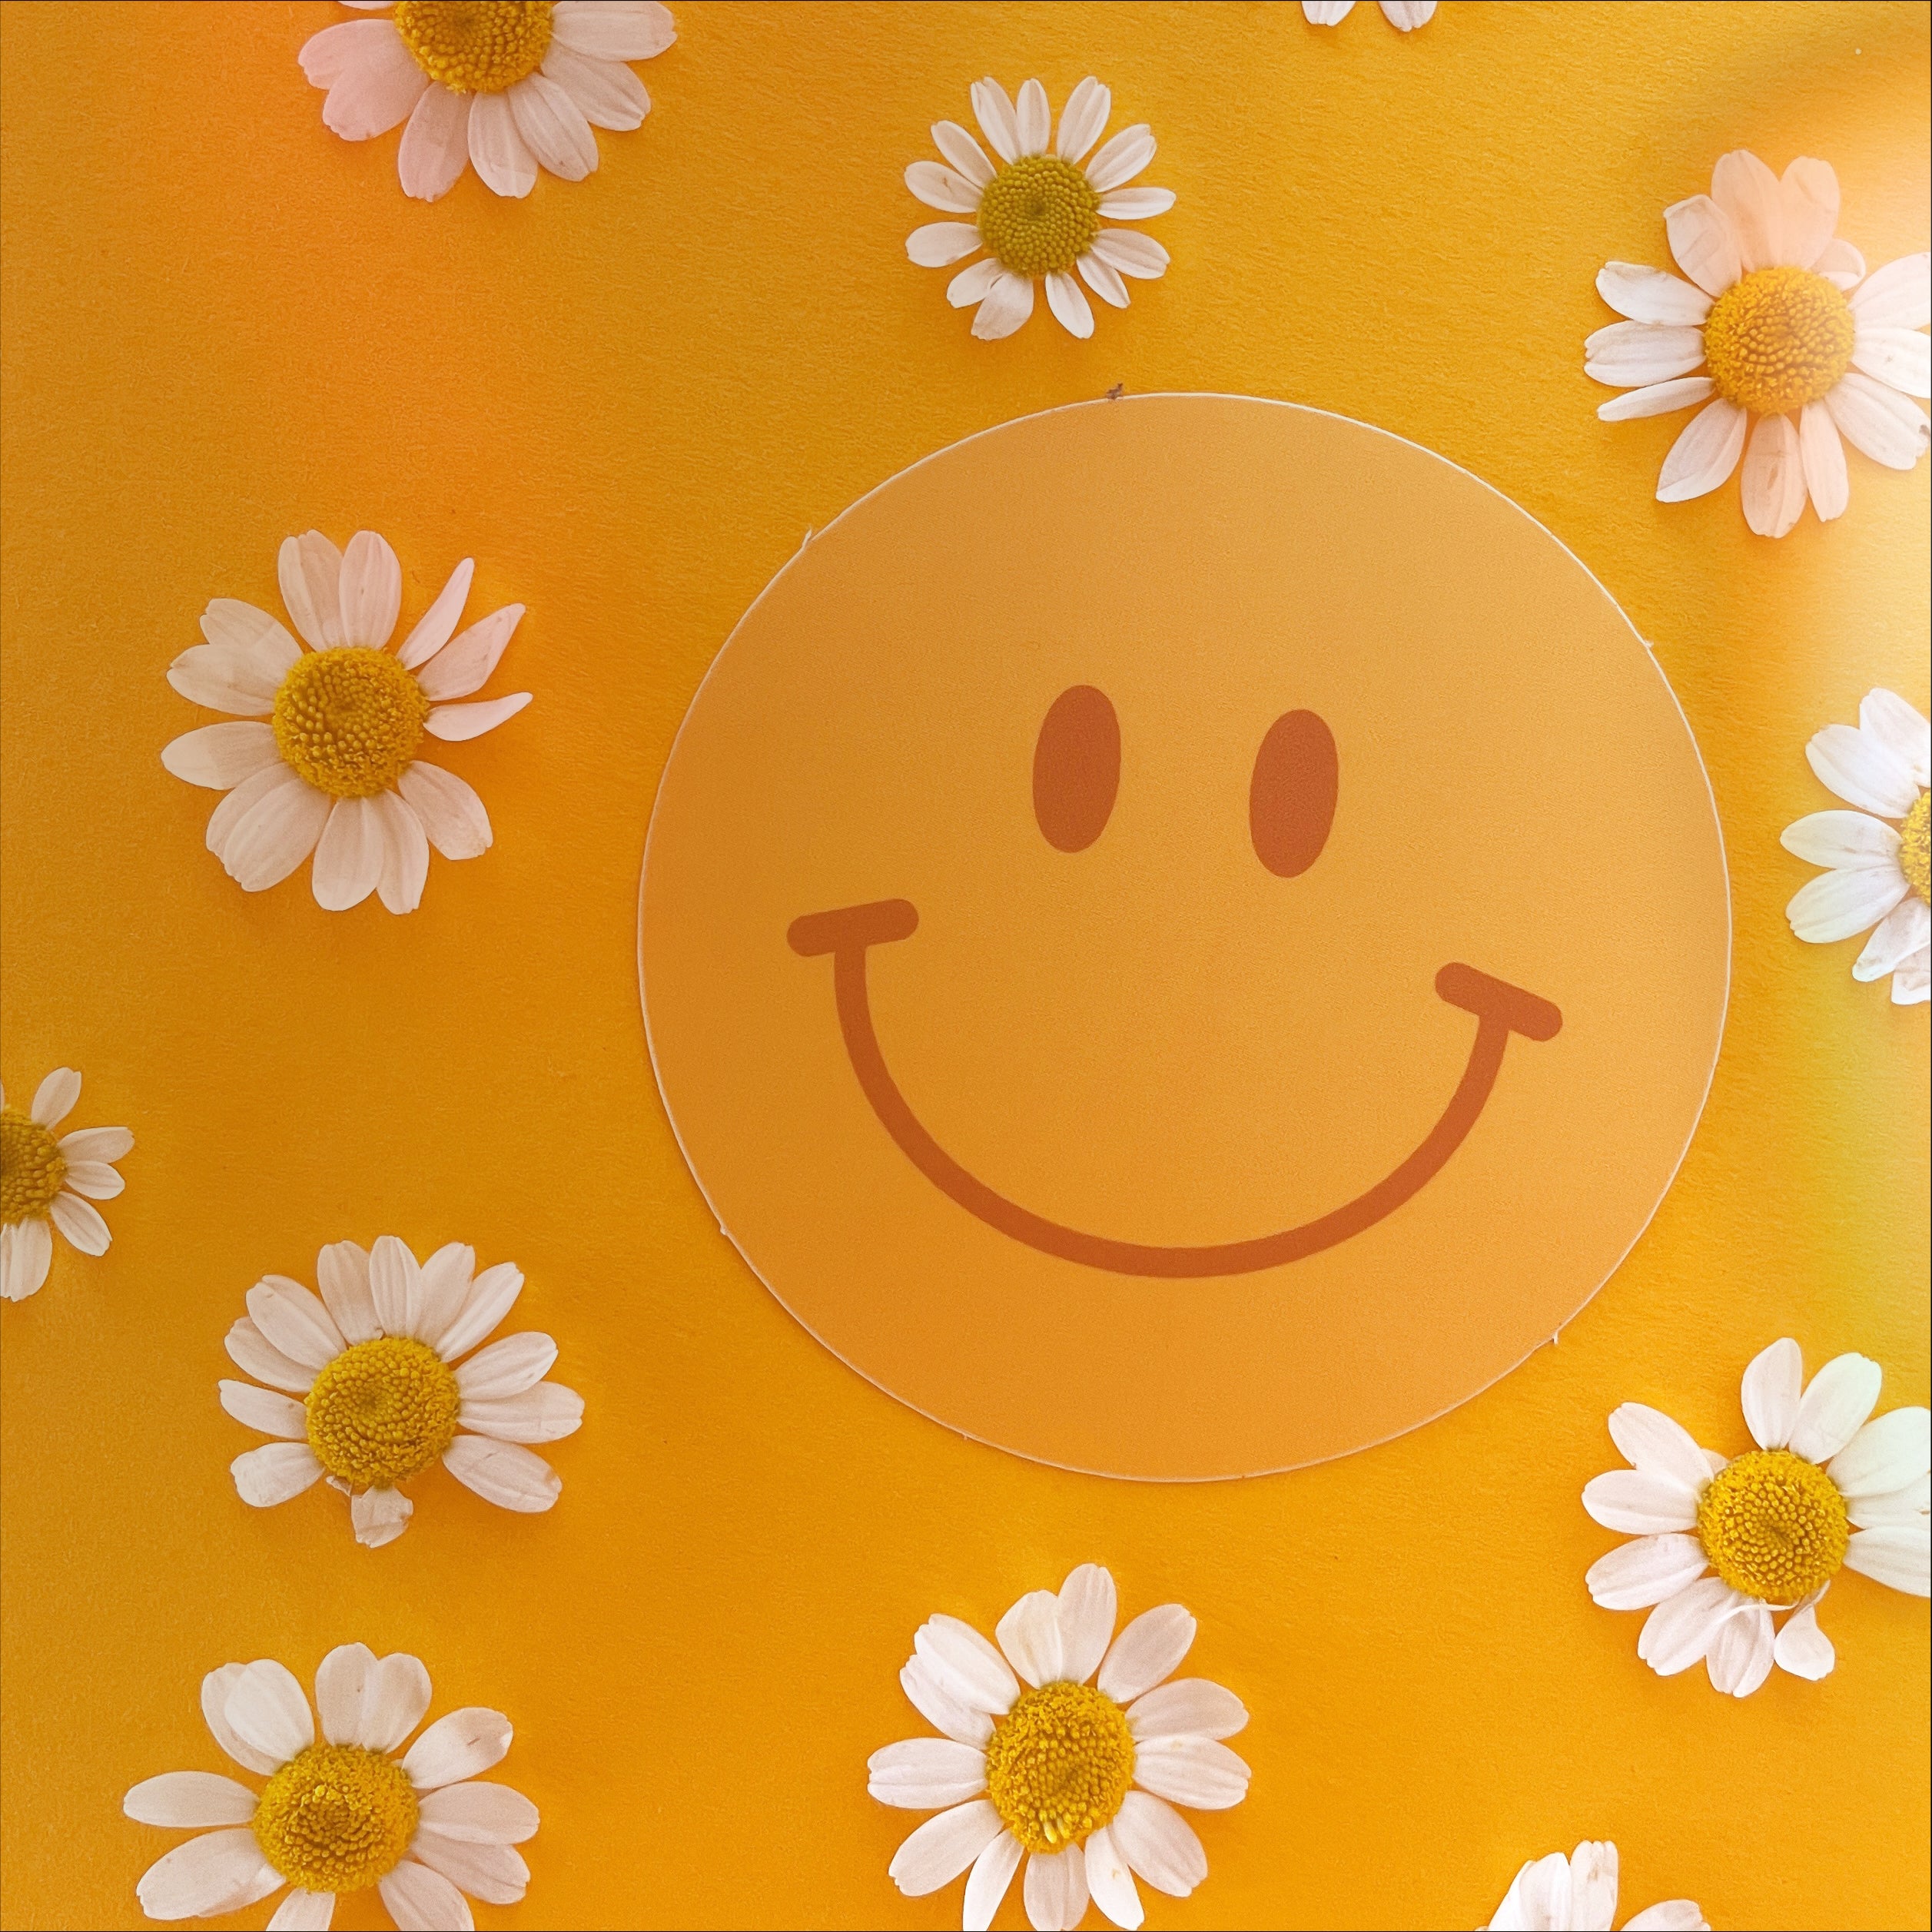 On an orange background with daisies is a yellow/orange circle smiley face sticker. 